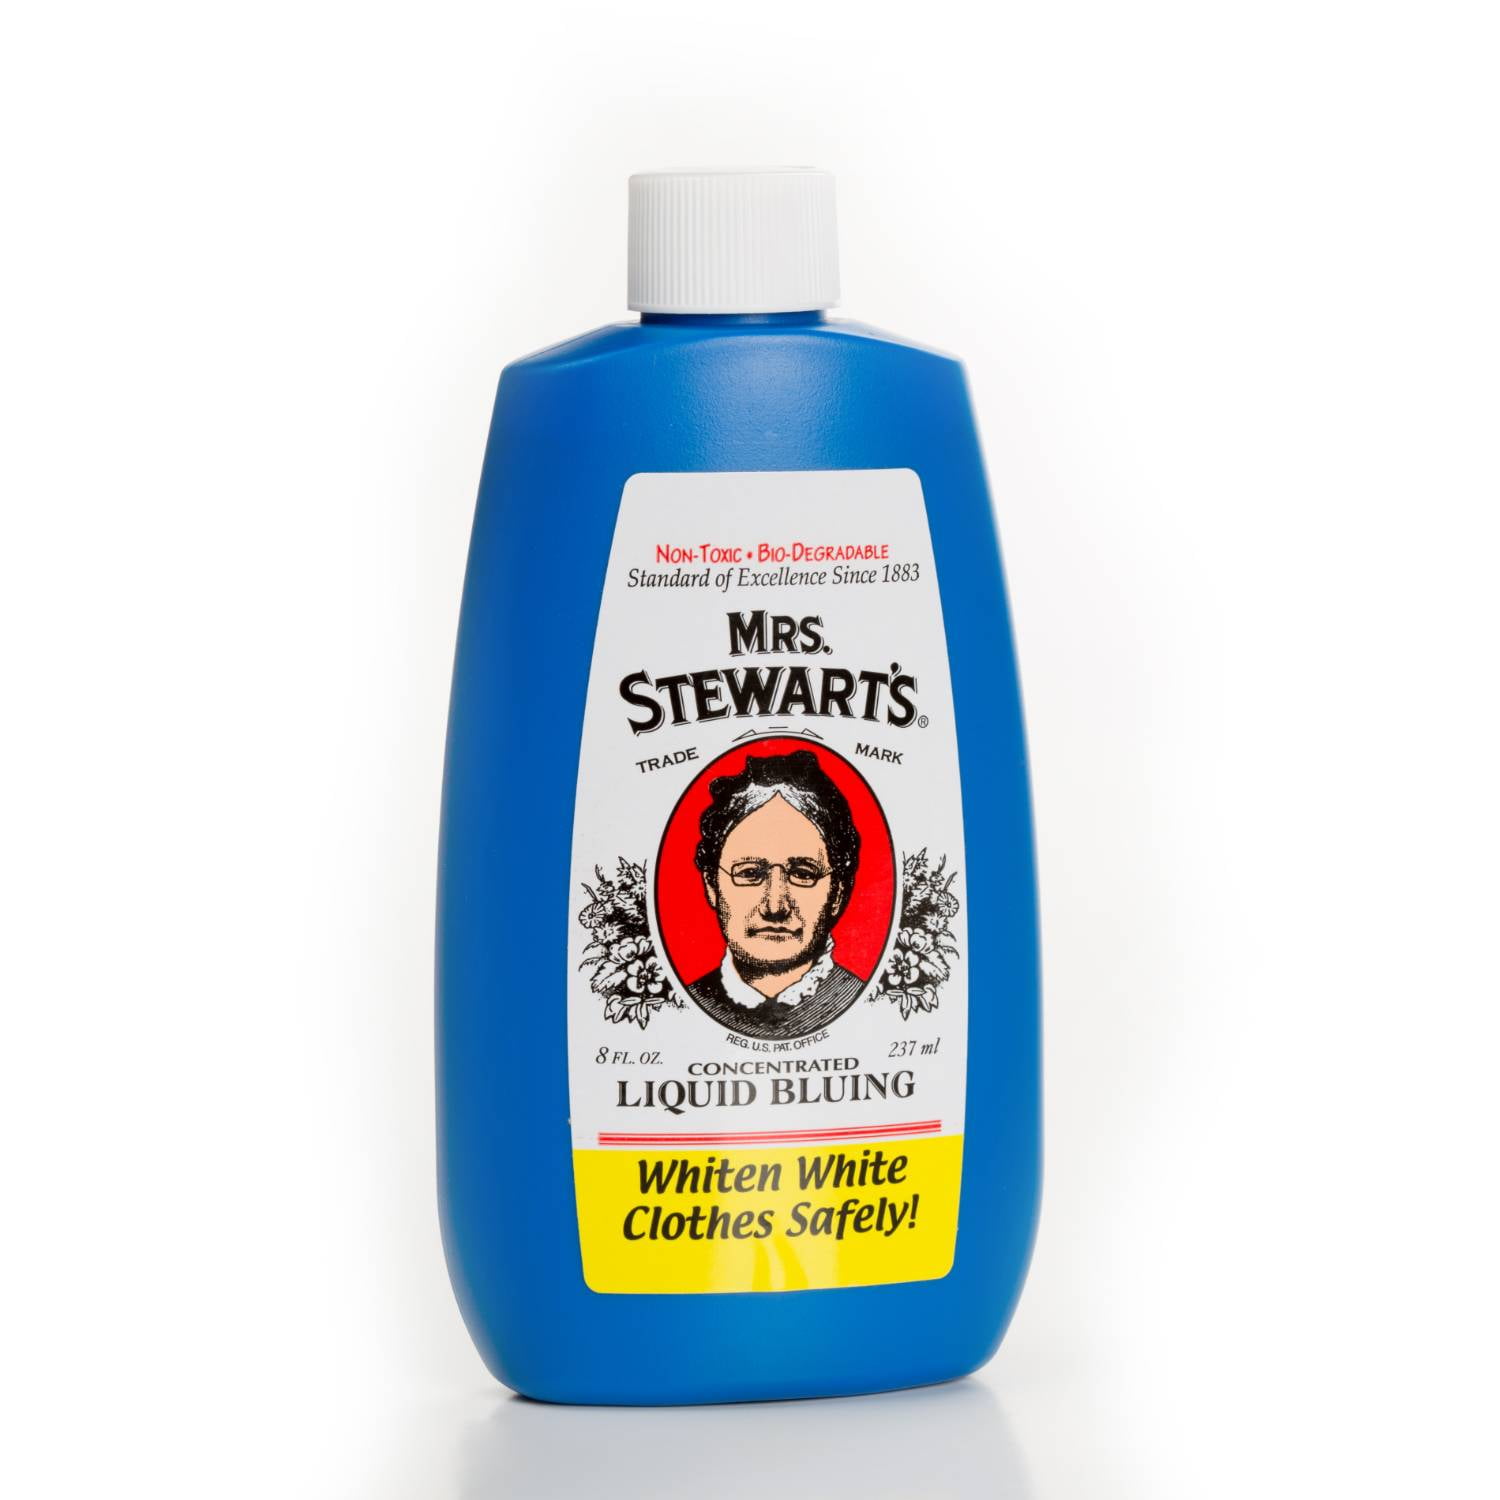  Mrs. Stewart's Concentrated Liquid Bluing, Non Toxic